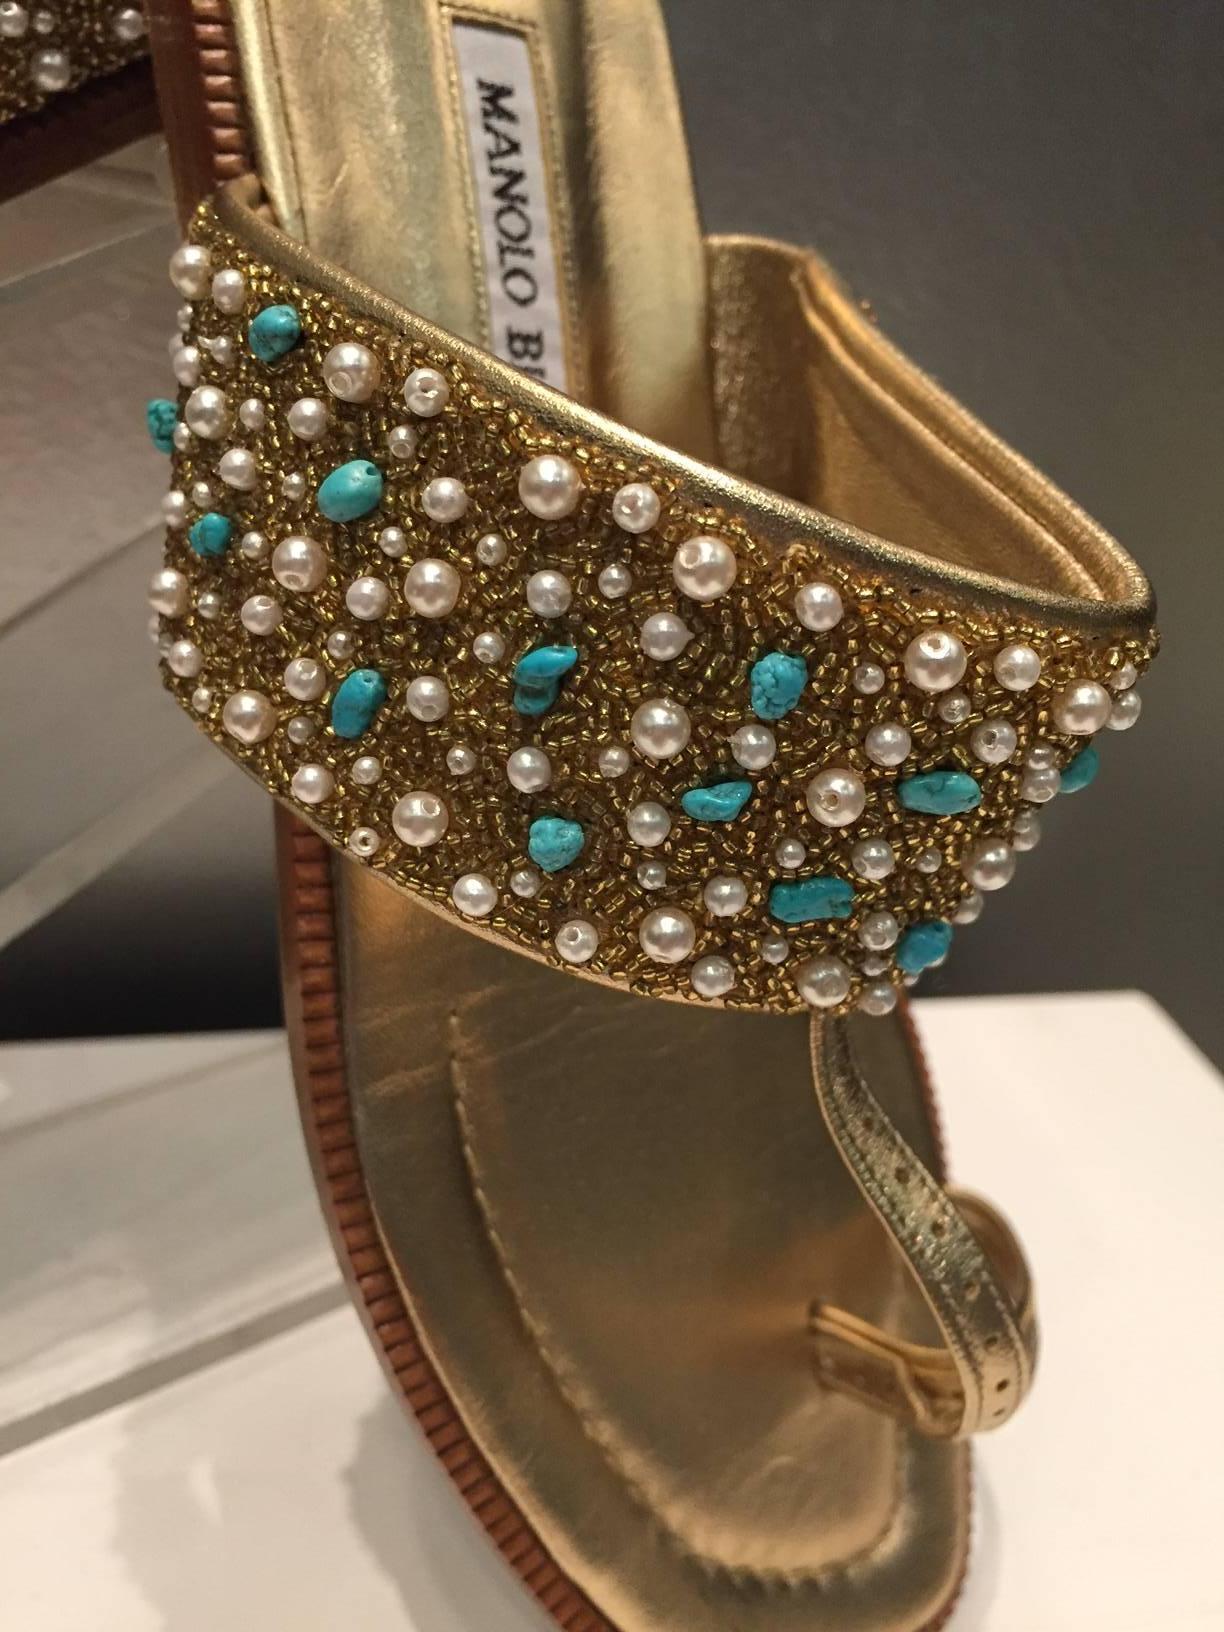 Women's Manolo Blahnik Gold Leather Sandal with Turquoise, Pearl and Gold Beaded Vamp